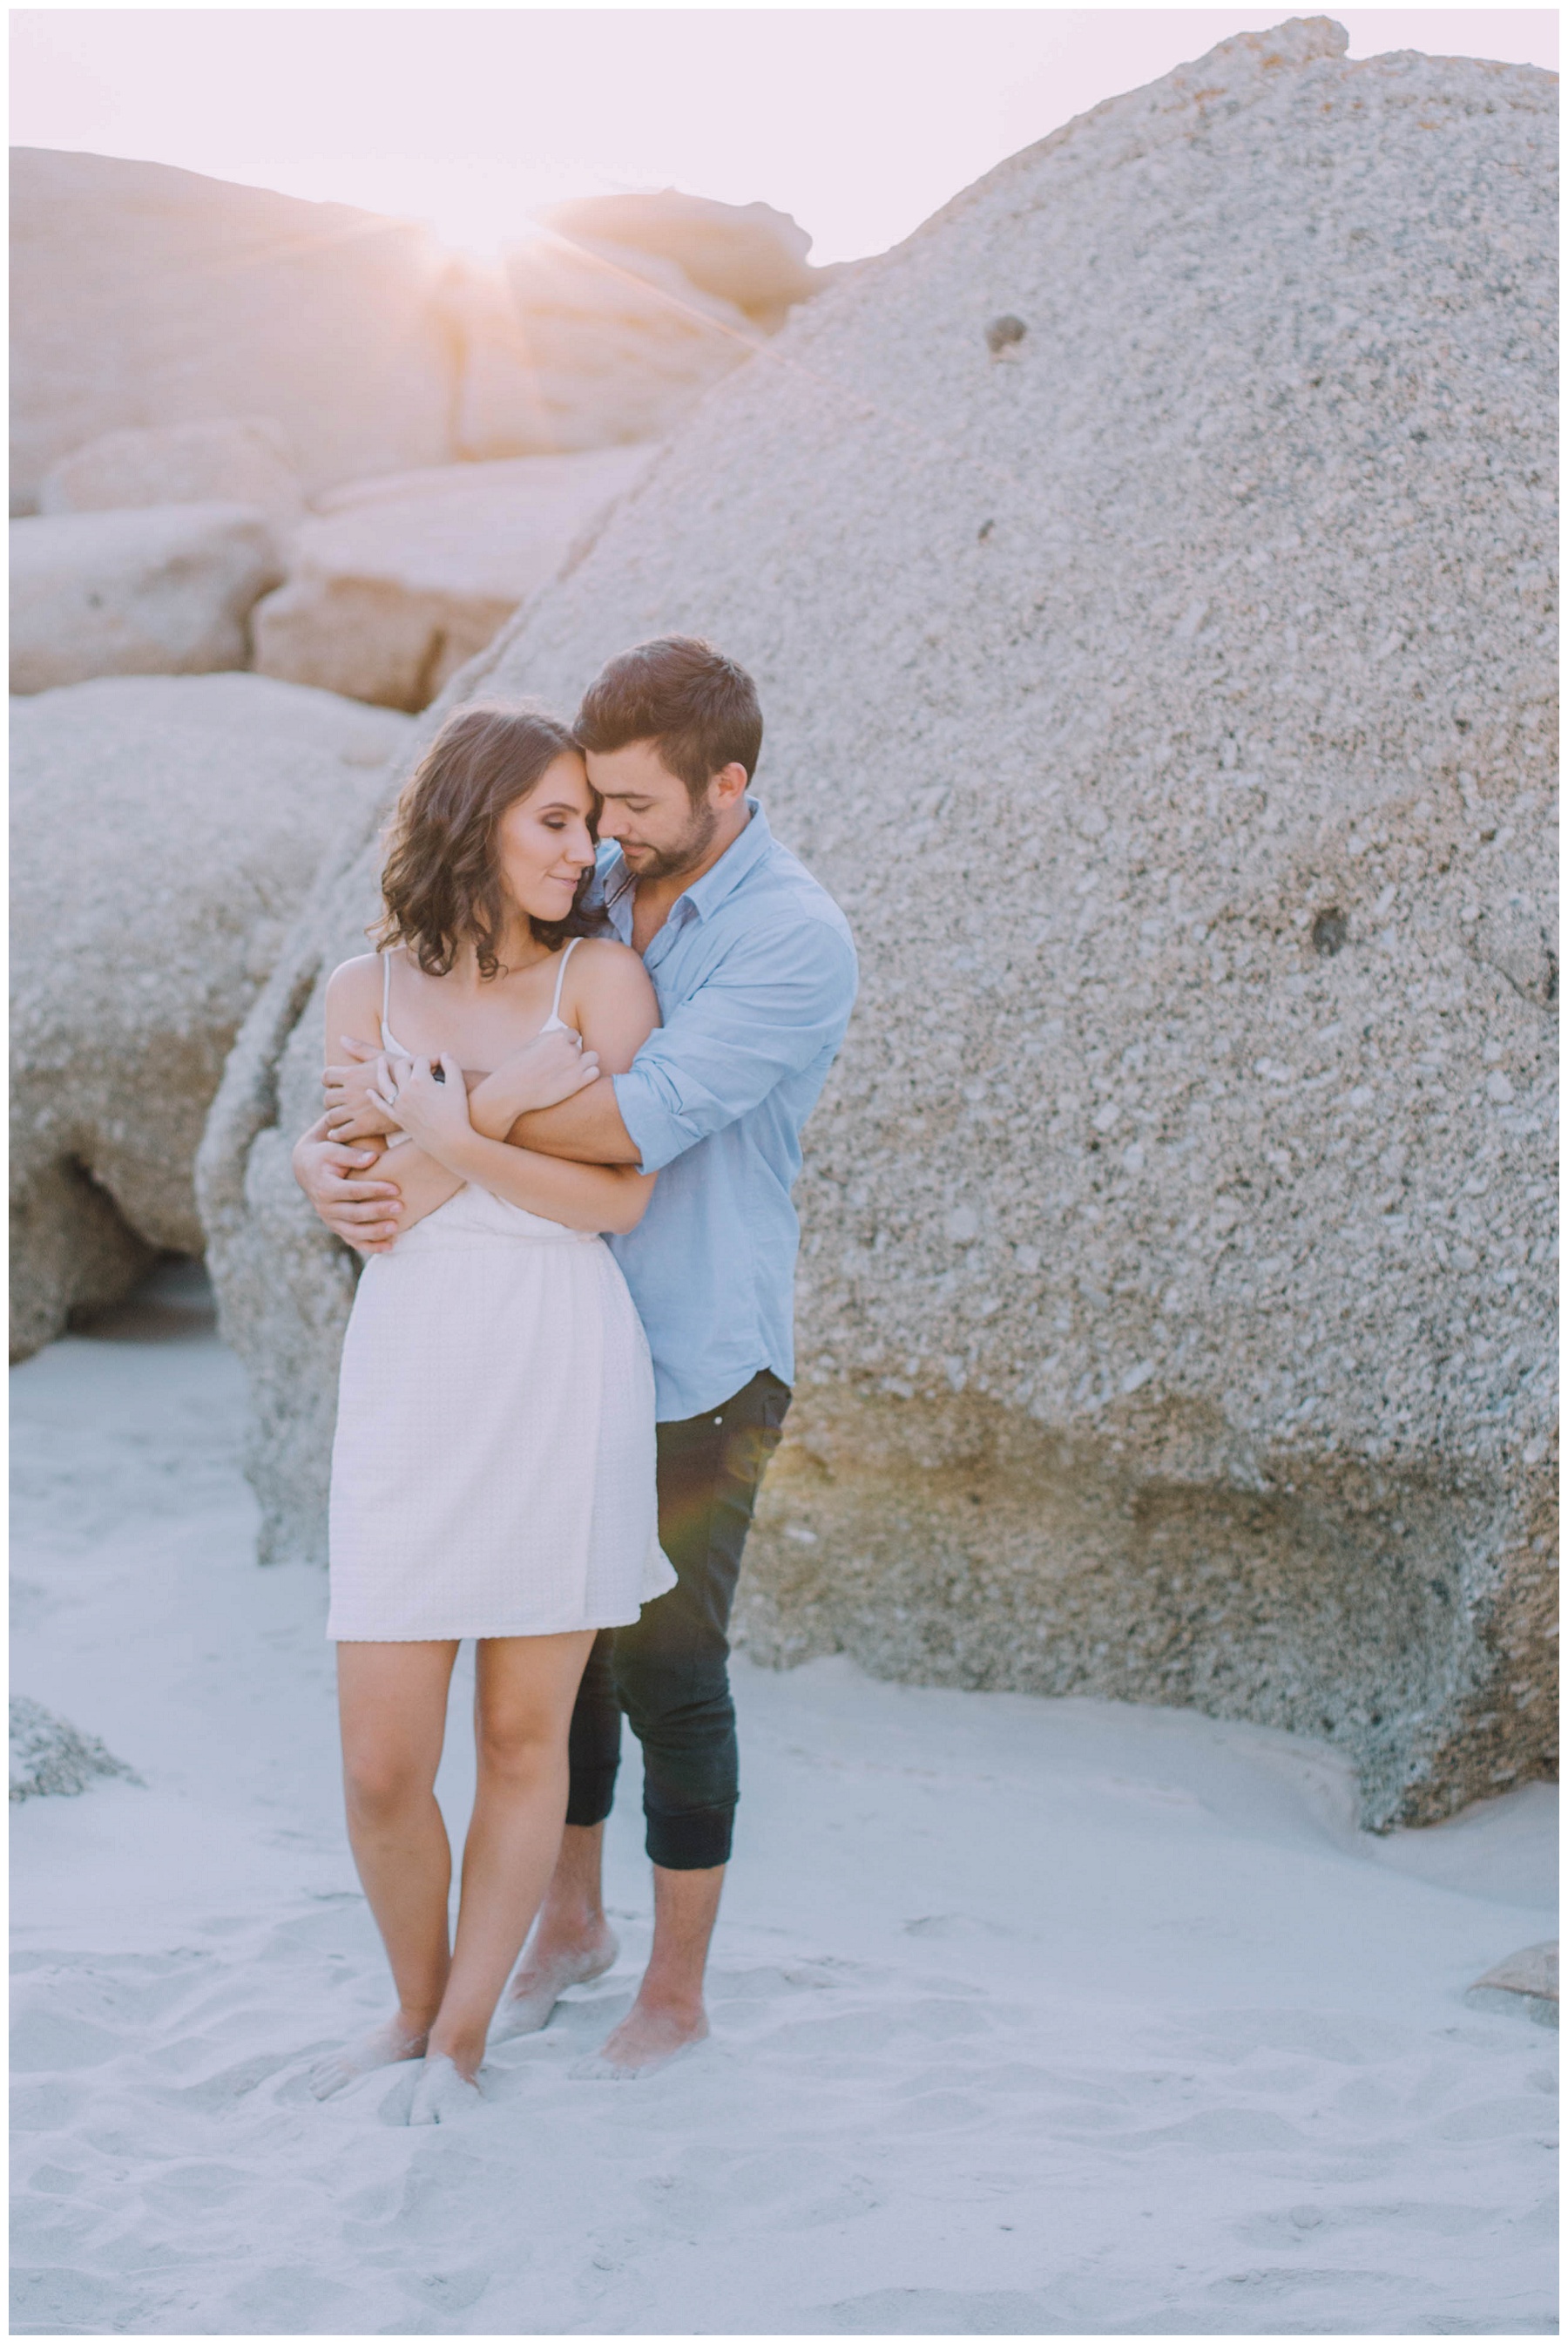 Ronel Kruger Cape Town Wedding and Lifestyle Photographer_8468.jpg